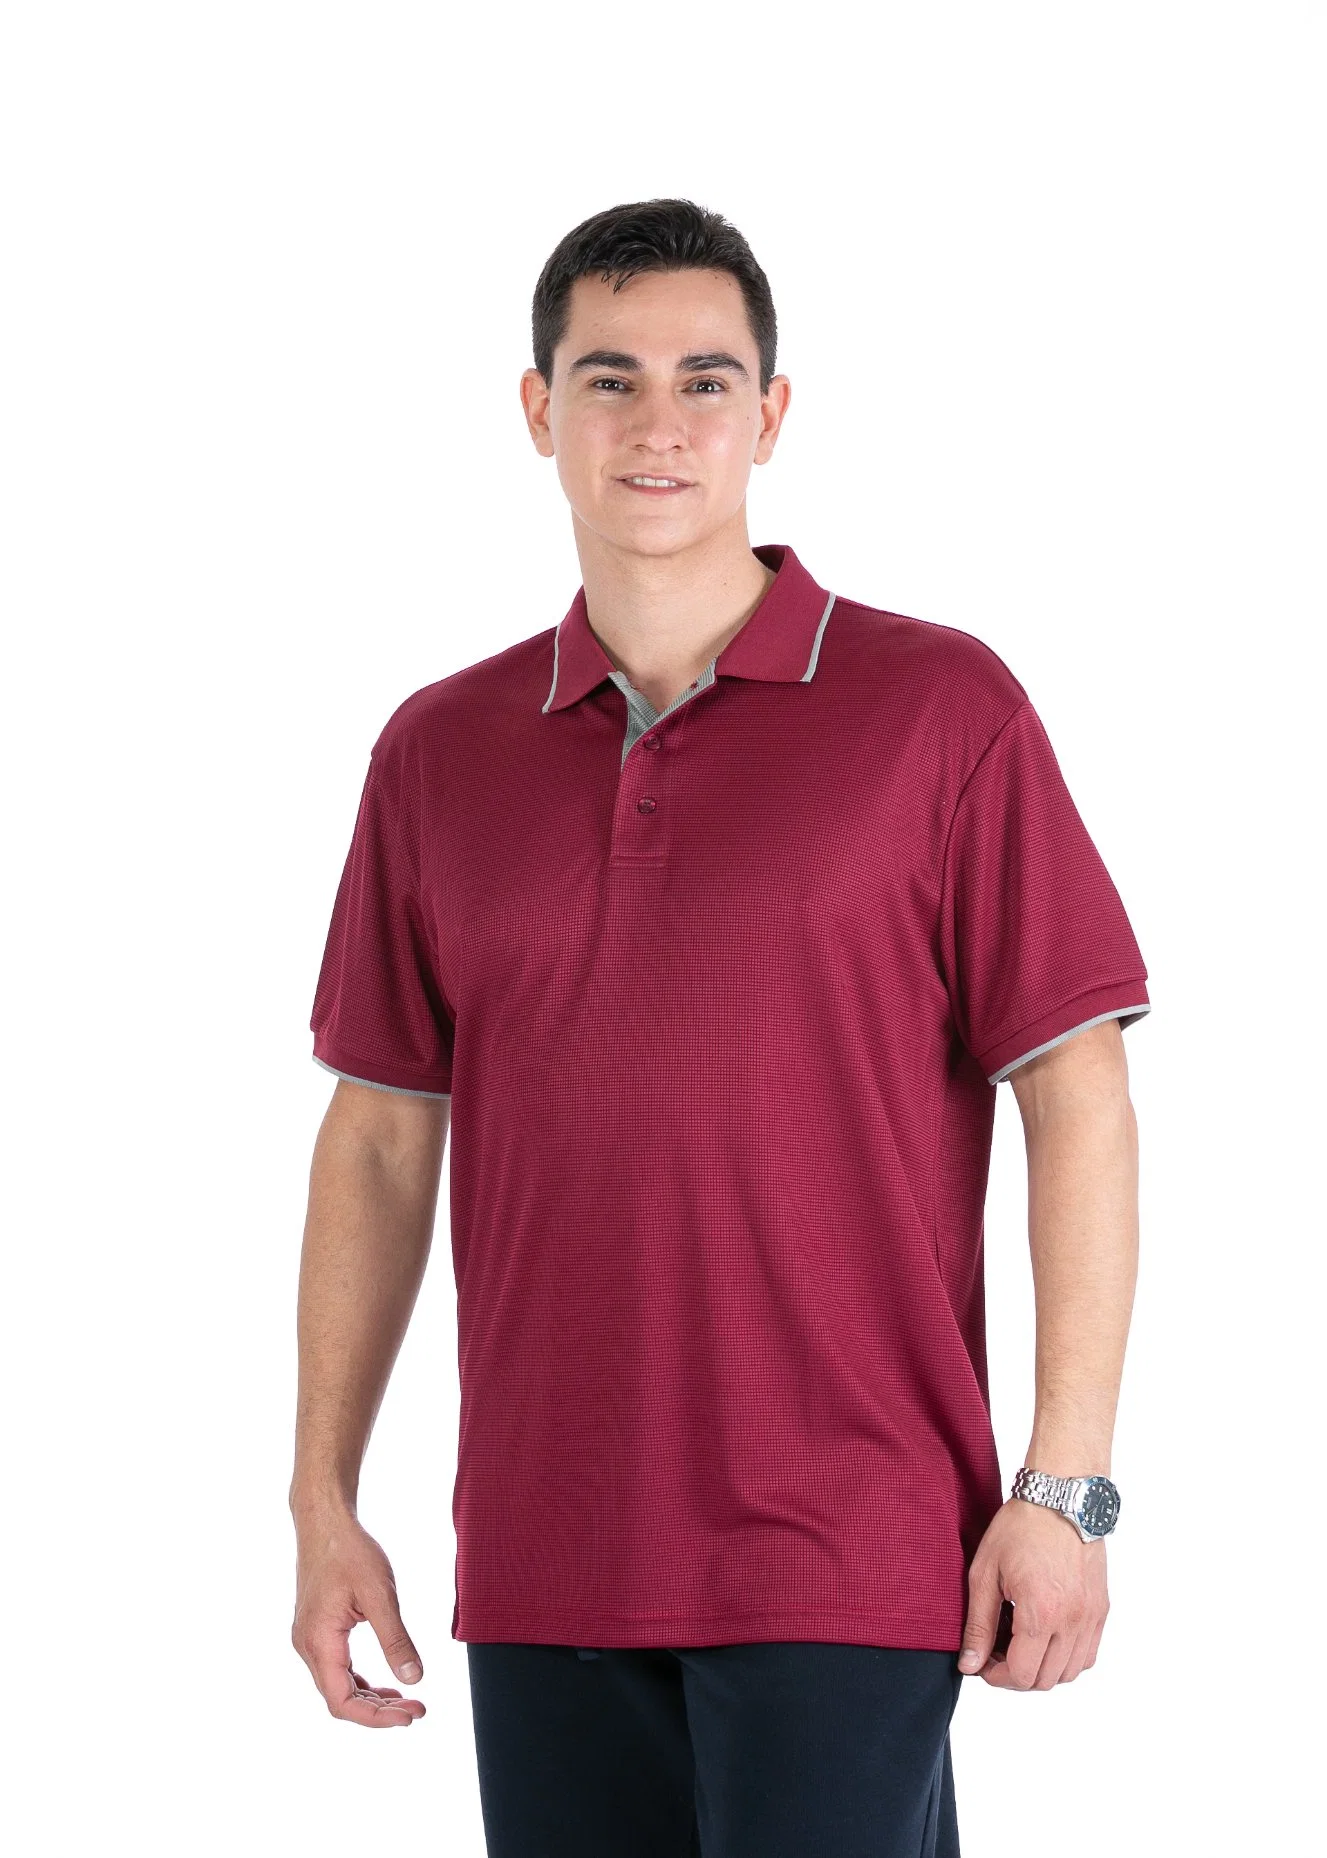 Men's Summer Cool Breathable Fabric Waffit Series Polo Shirt Clothing